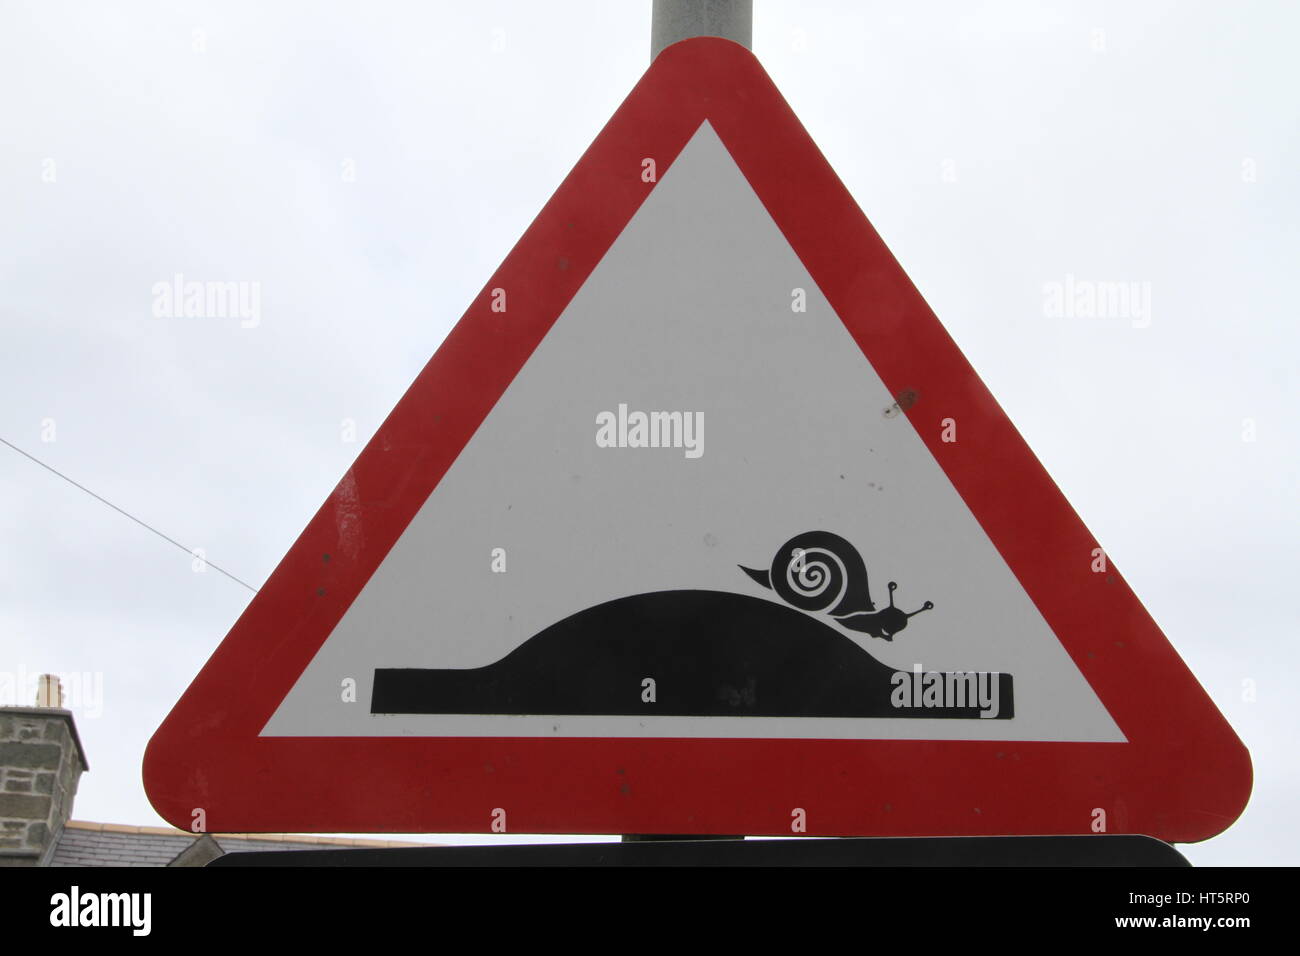 Unusual road traffic sign spotted in Lerwick, Shetland, UK (beware bumps - with snail inhabitants - or proceed at snail speed) Stock Photo